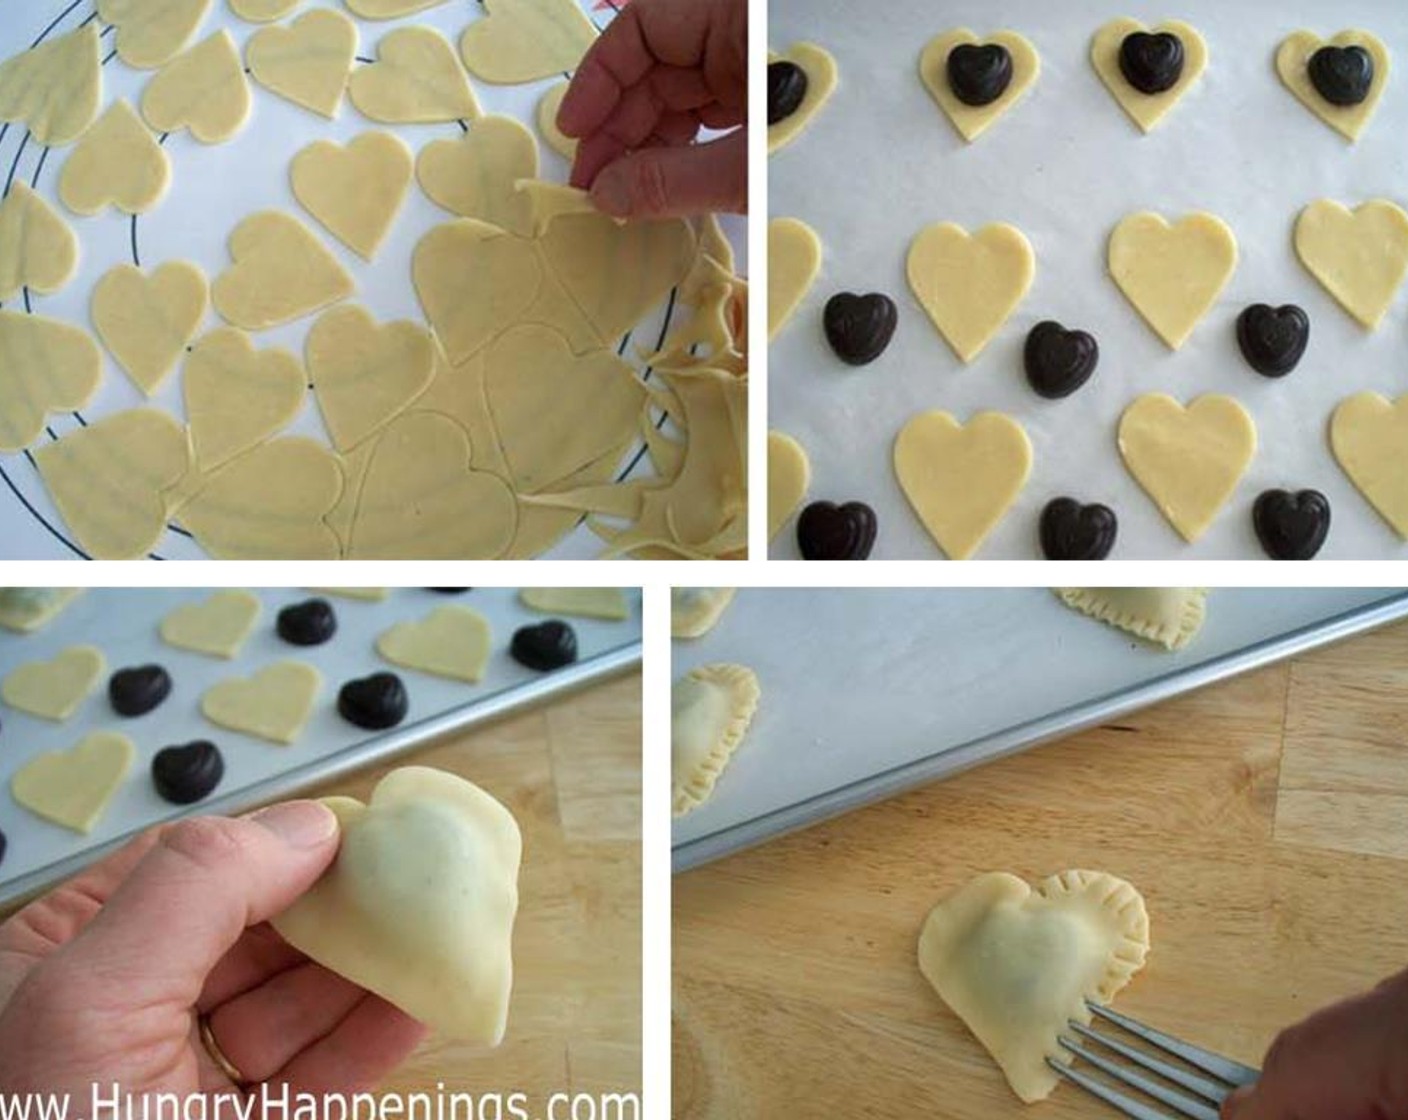 step 6 Top each with one large dough heart, pinching the edges together to seal well. Use a fork to crimp all around the edges of each heart ravioli. Brush the top of the heart with egg wash.